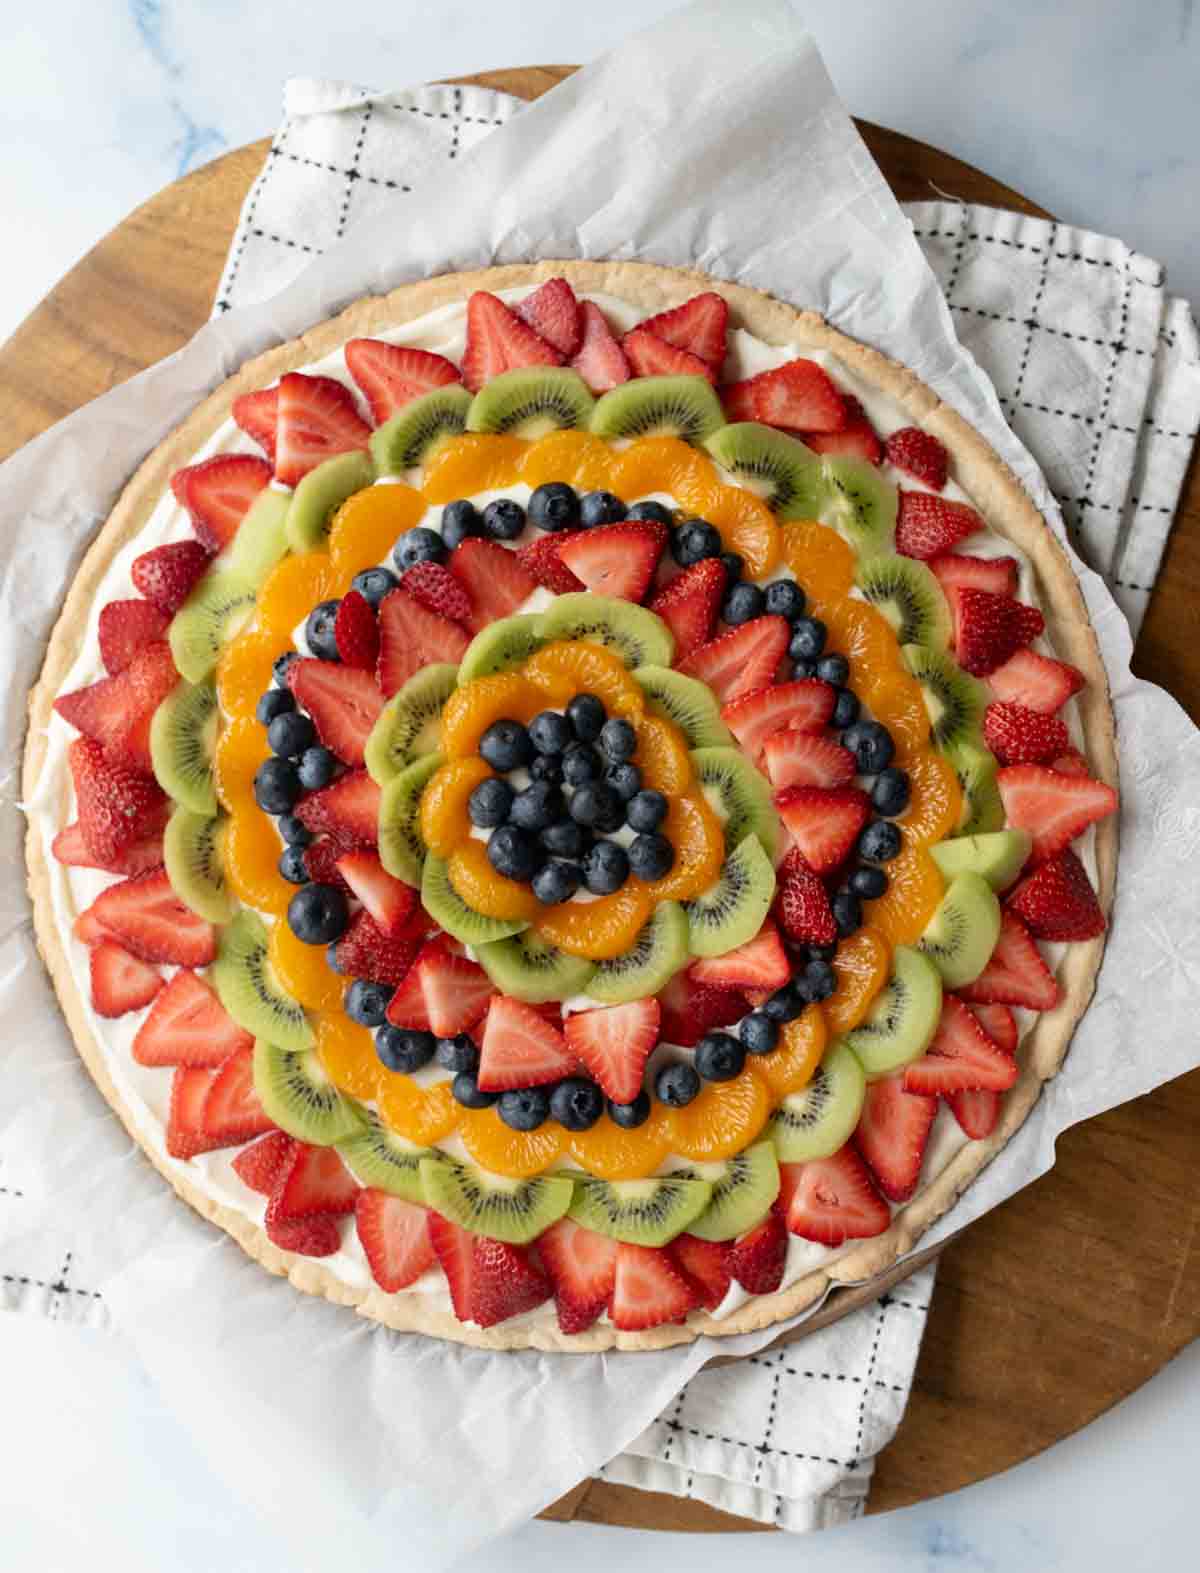 top view of a whole fruit pizza with slices of colorful fruit organized in a near mandala design on a round plate